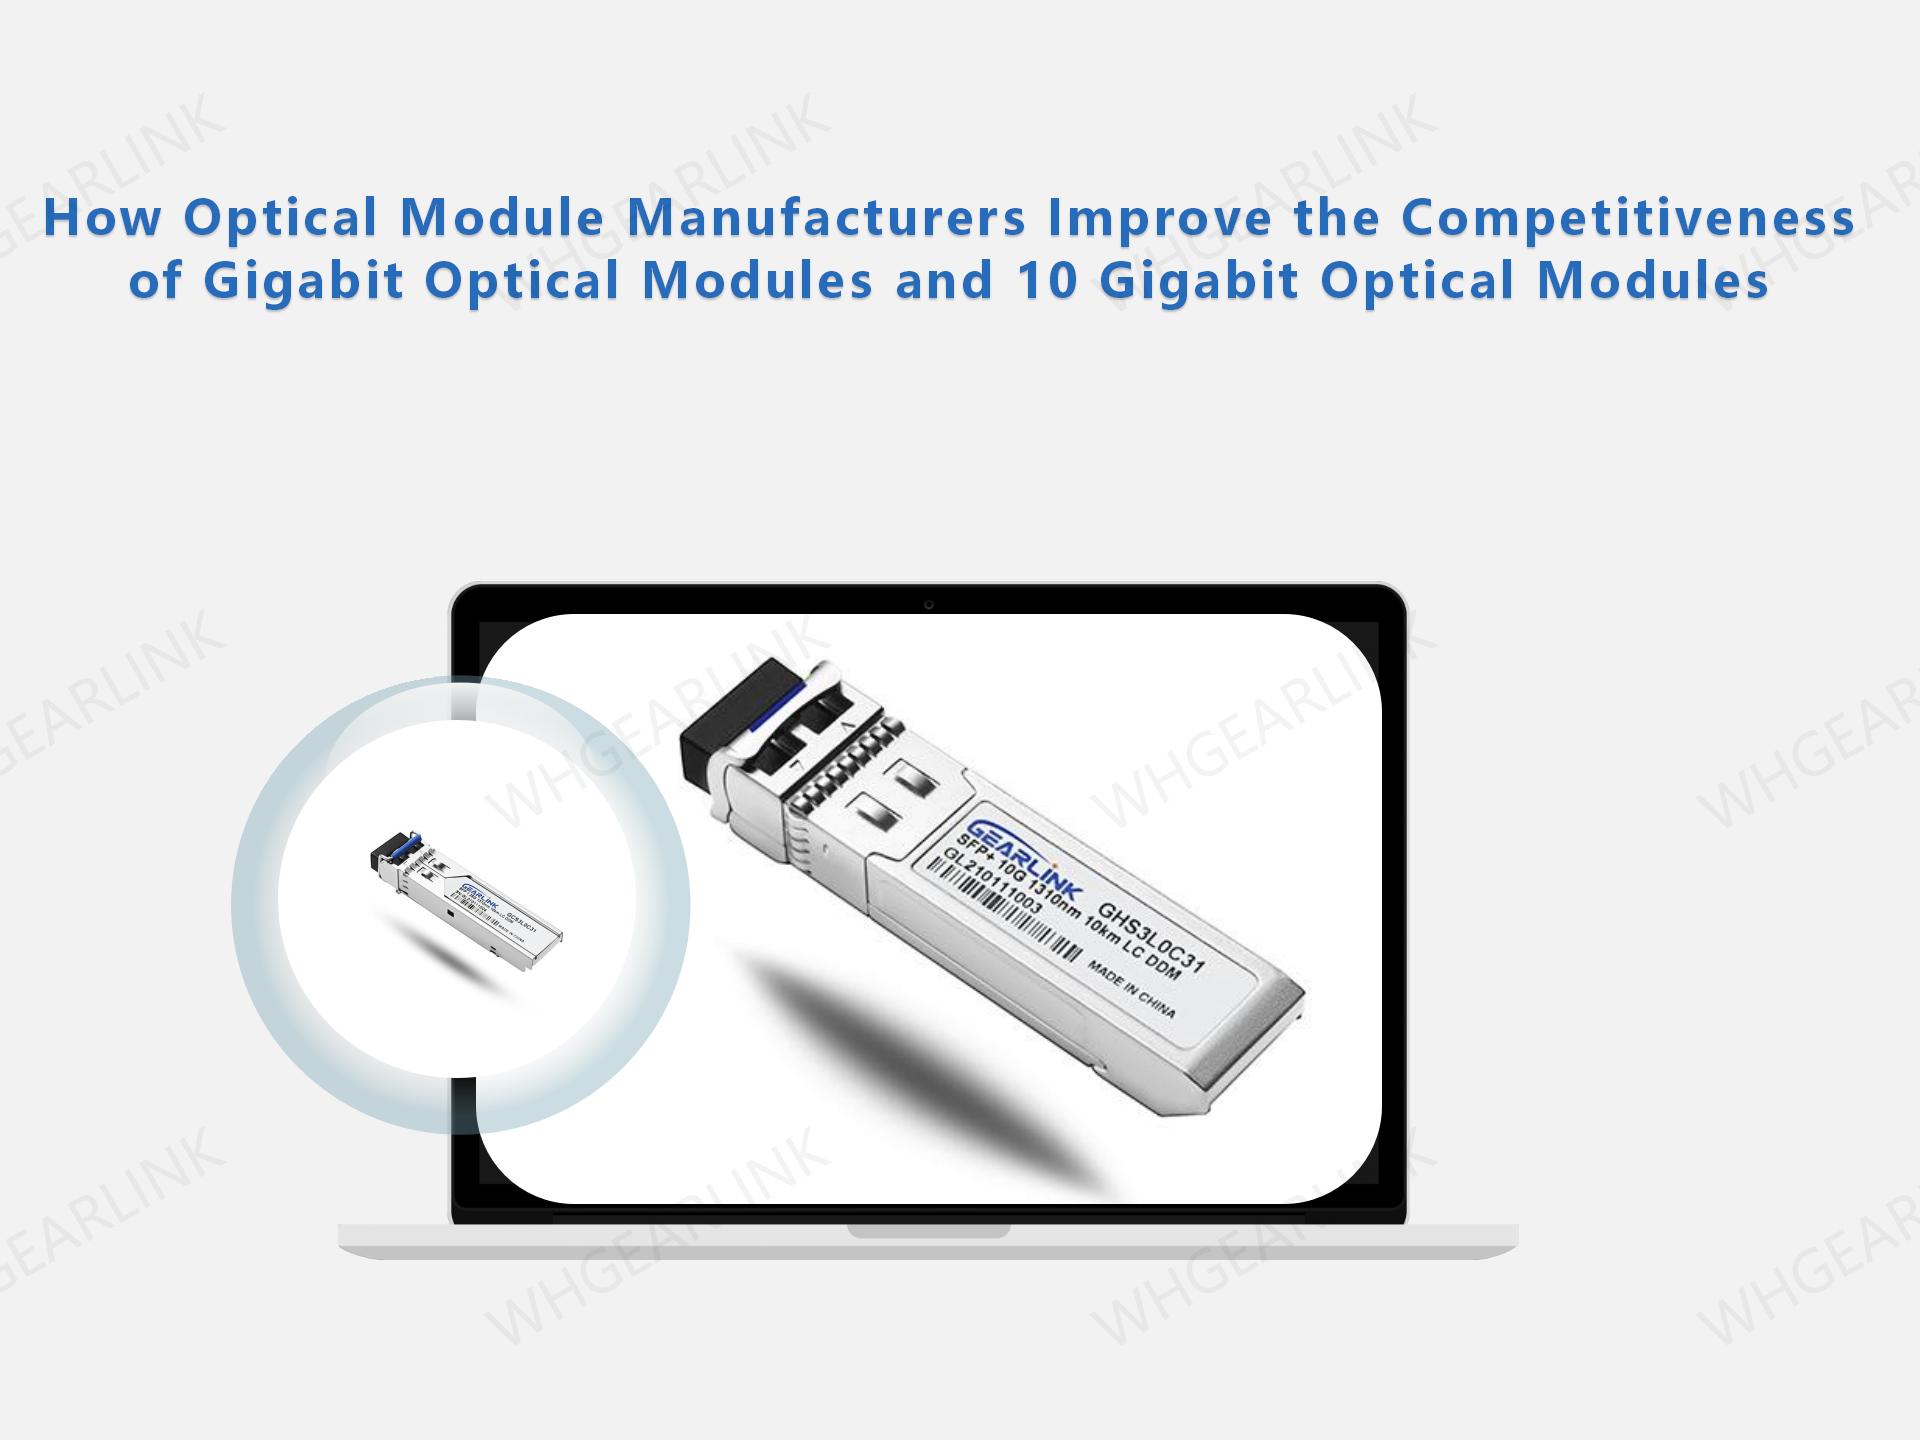 How Optical Module Manufacturers Improve the Competitiveness of Gigabit Optical Modules and 10 Gigabit Optical Modules